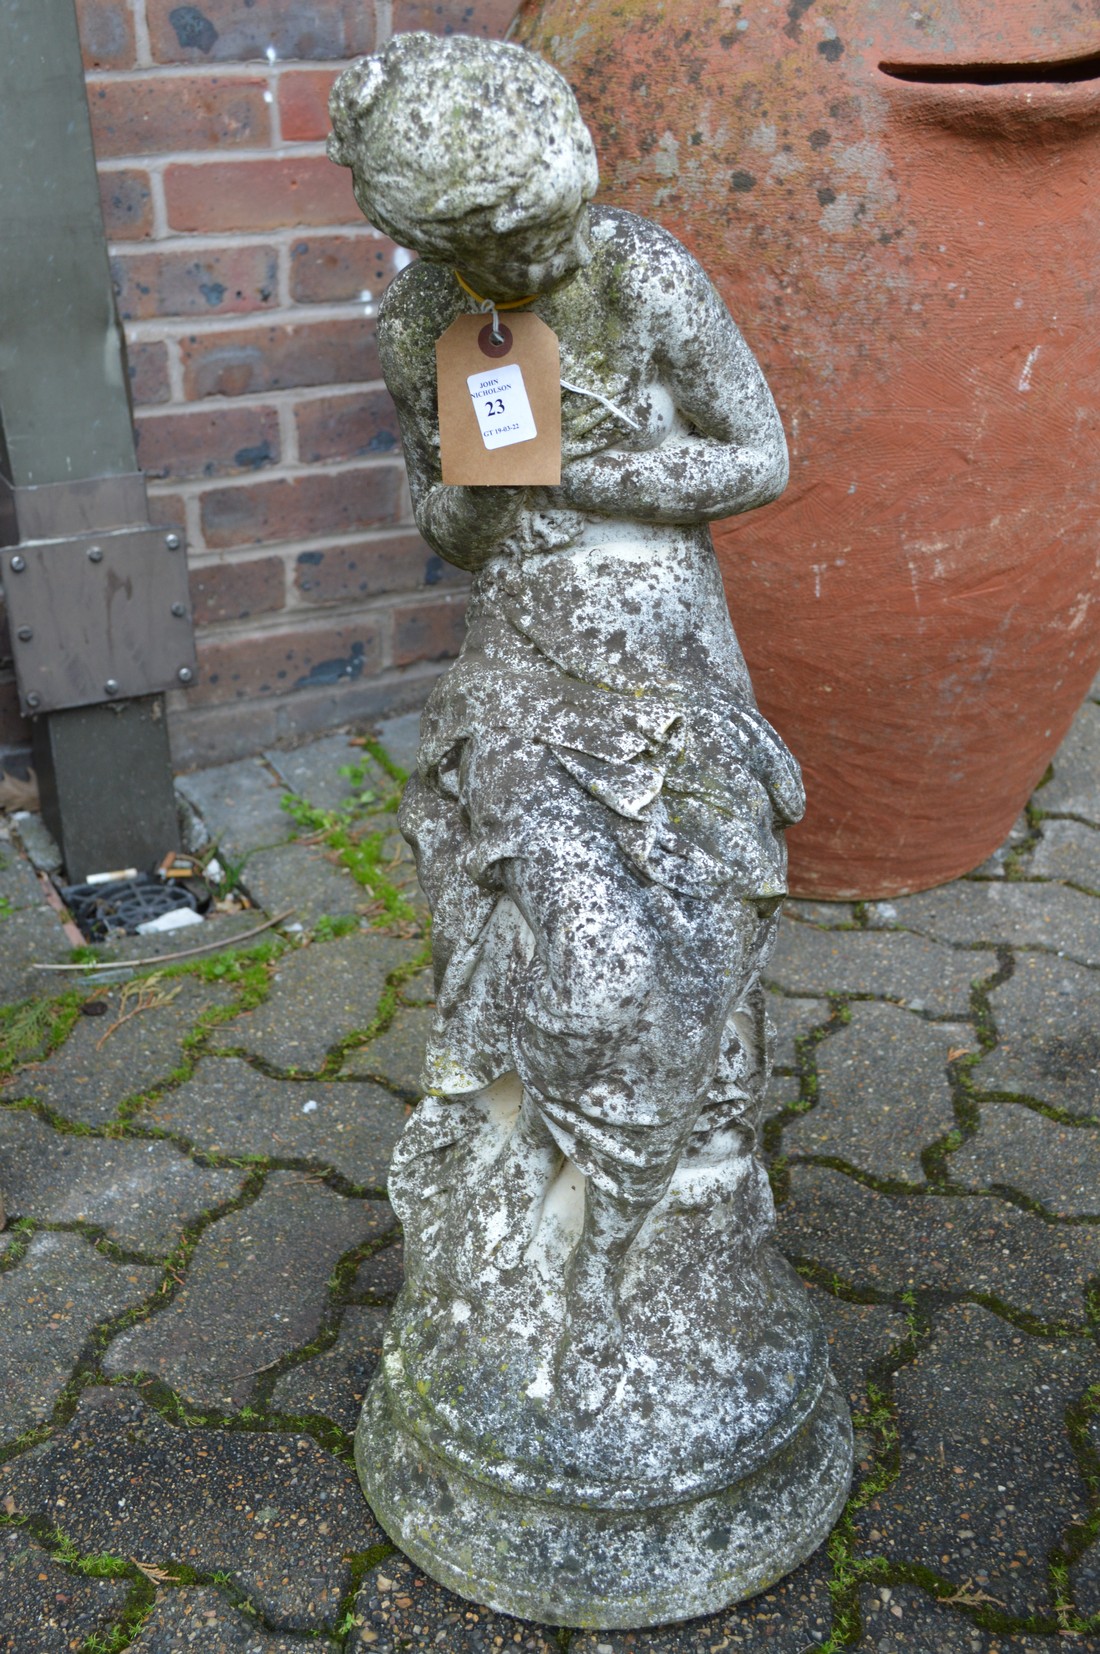 A composite garden ornament modelled as a classical young lady.